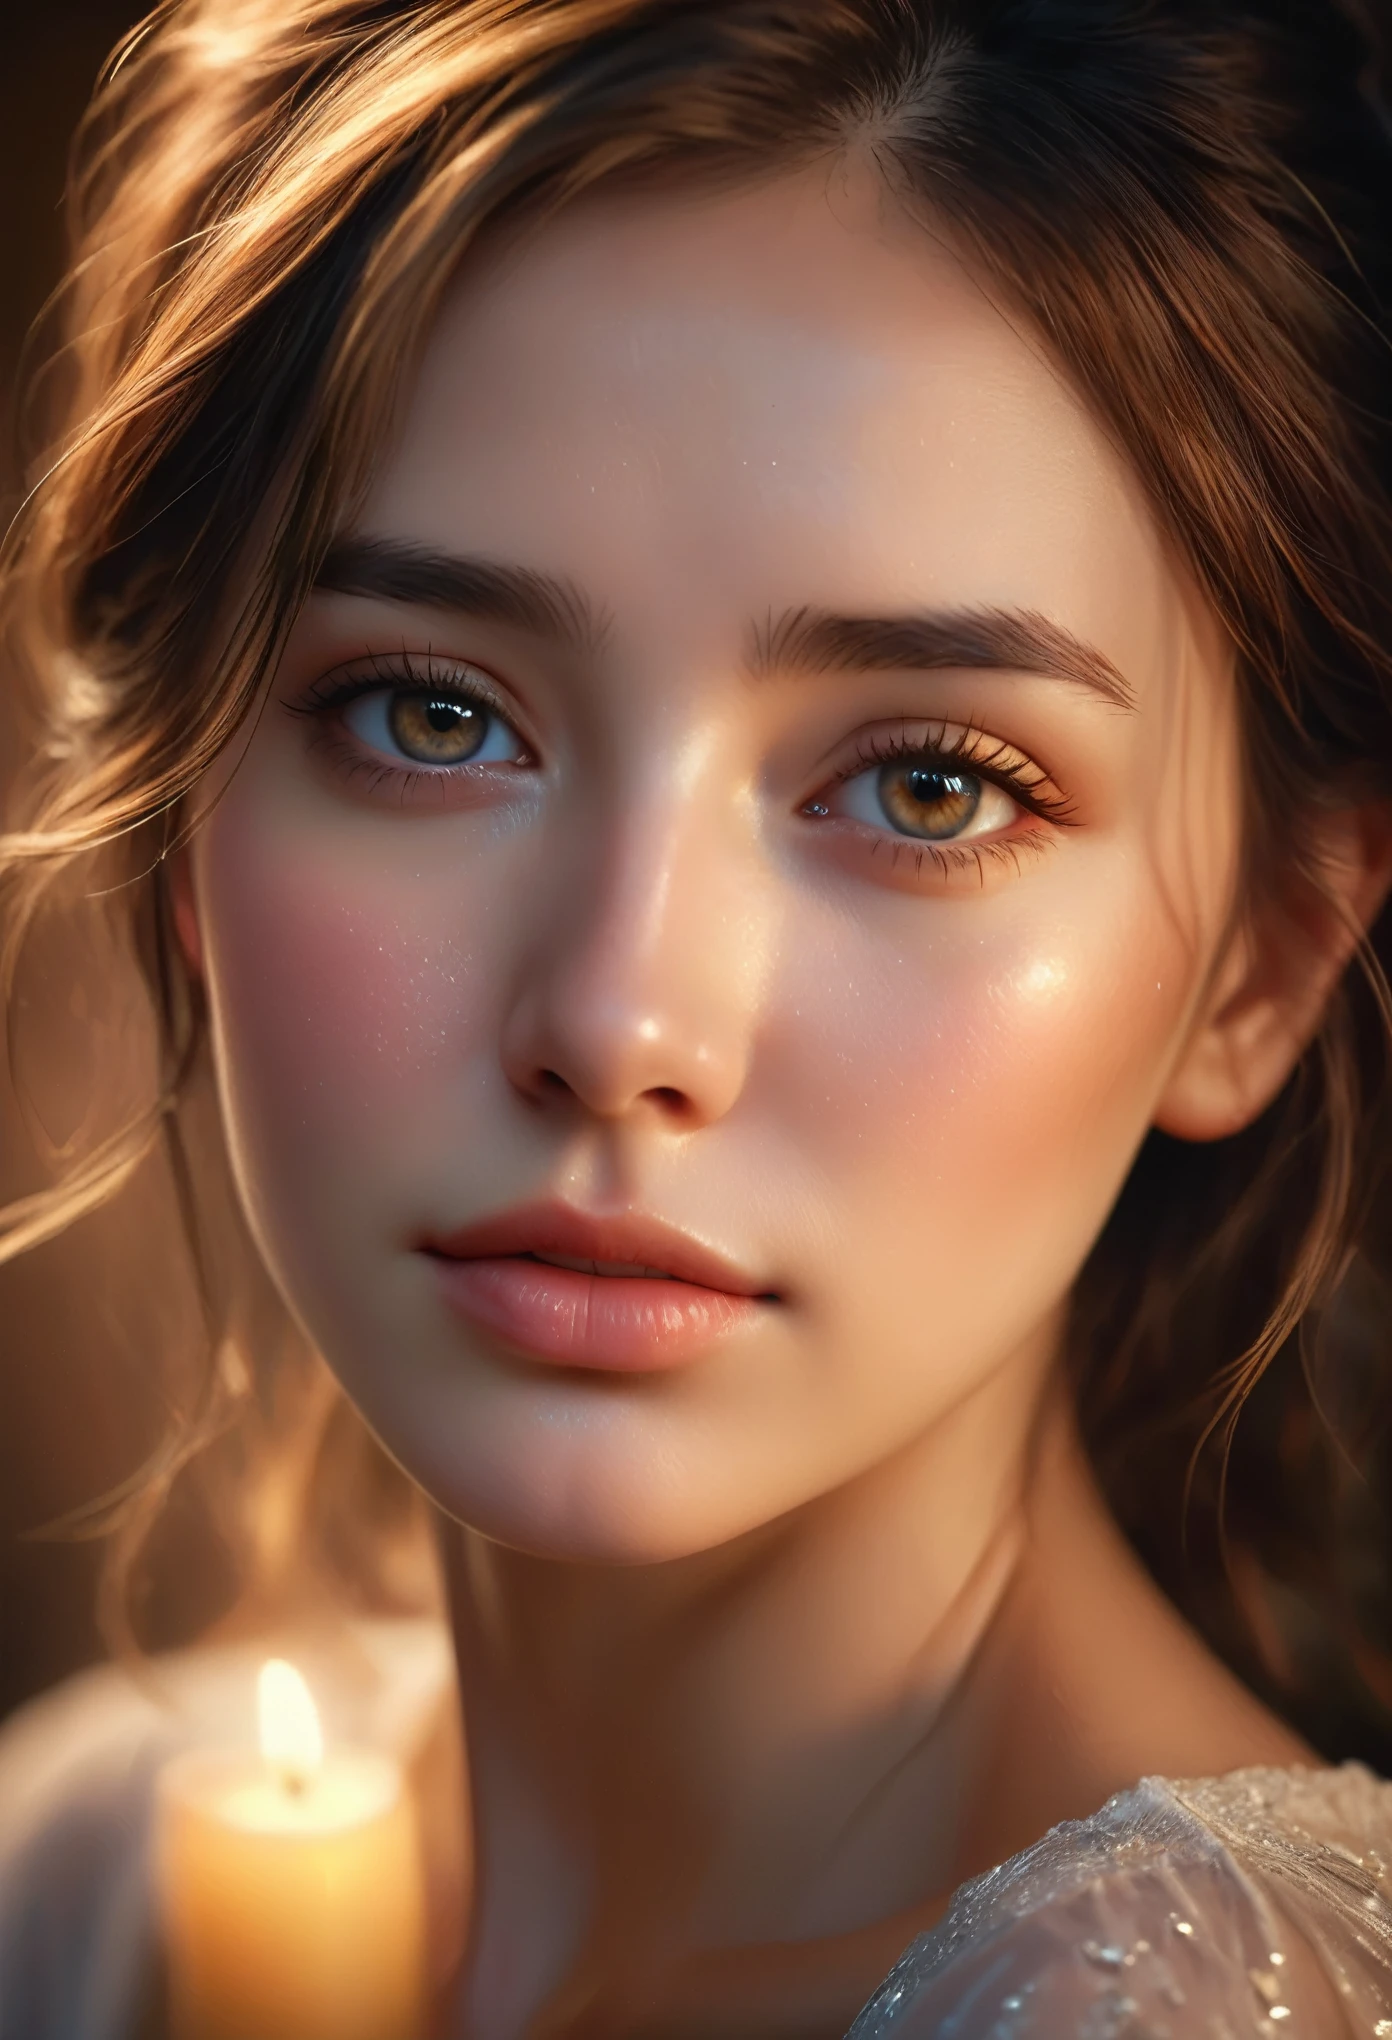 A close-up of a beautiful young woman's face, with a single tear gently rolling down her cheek. Her eyes should be filled with deep emotion, sparkling with unshed tears. Her skin should be smooth and radiant, with detailed textures that enhance the realism. The lighting should be soft and warm, casting a gentle glow that highlights her delicate features and the tear. The background should be softly blurred, keeping the focus entirely on her expressive face. Include subtle details like stray hairs softly framing her face to add to the overall beauty and emotion of the scene.,(masterpiece:1.3),(highest quality:1.4),(ultra detailed:1.5),High resolution,extremely detailed,unity 8k wallpaper,